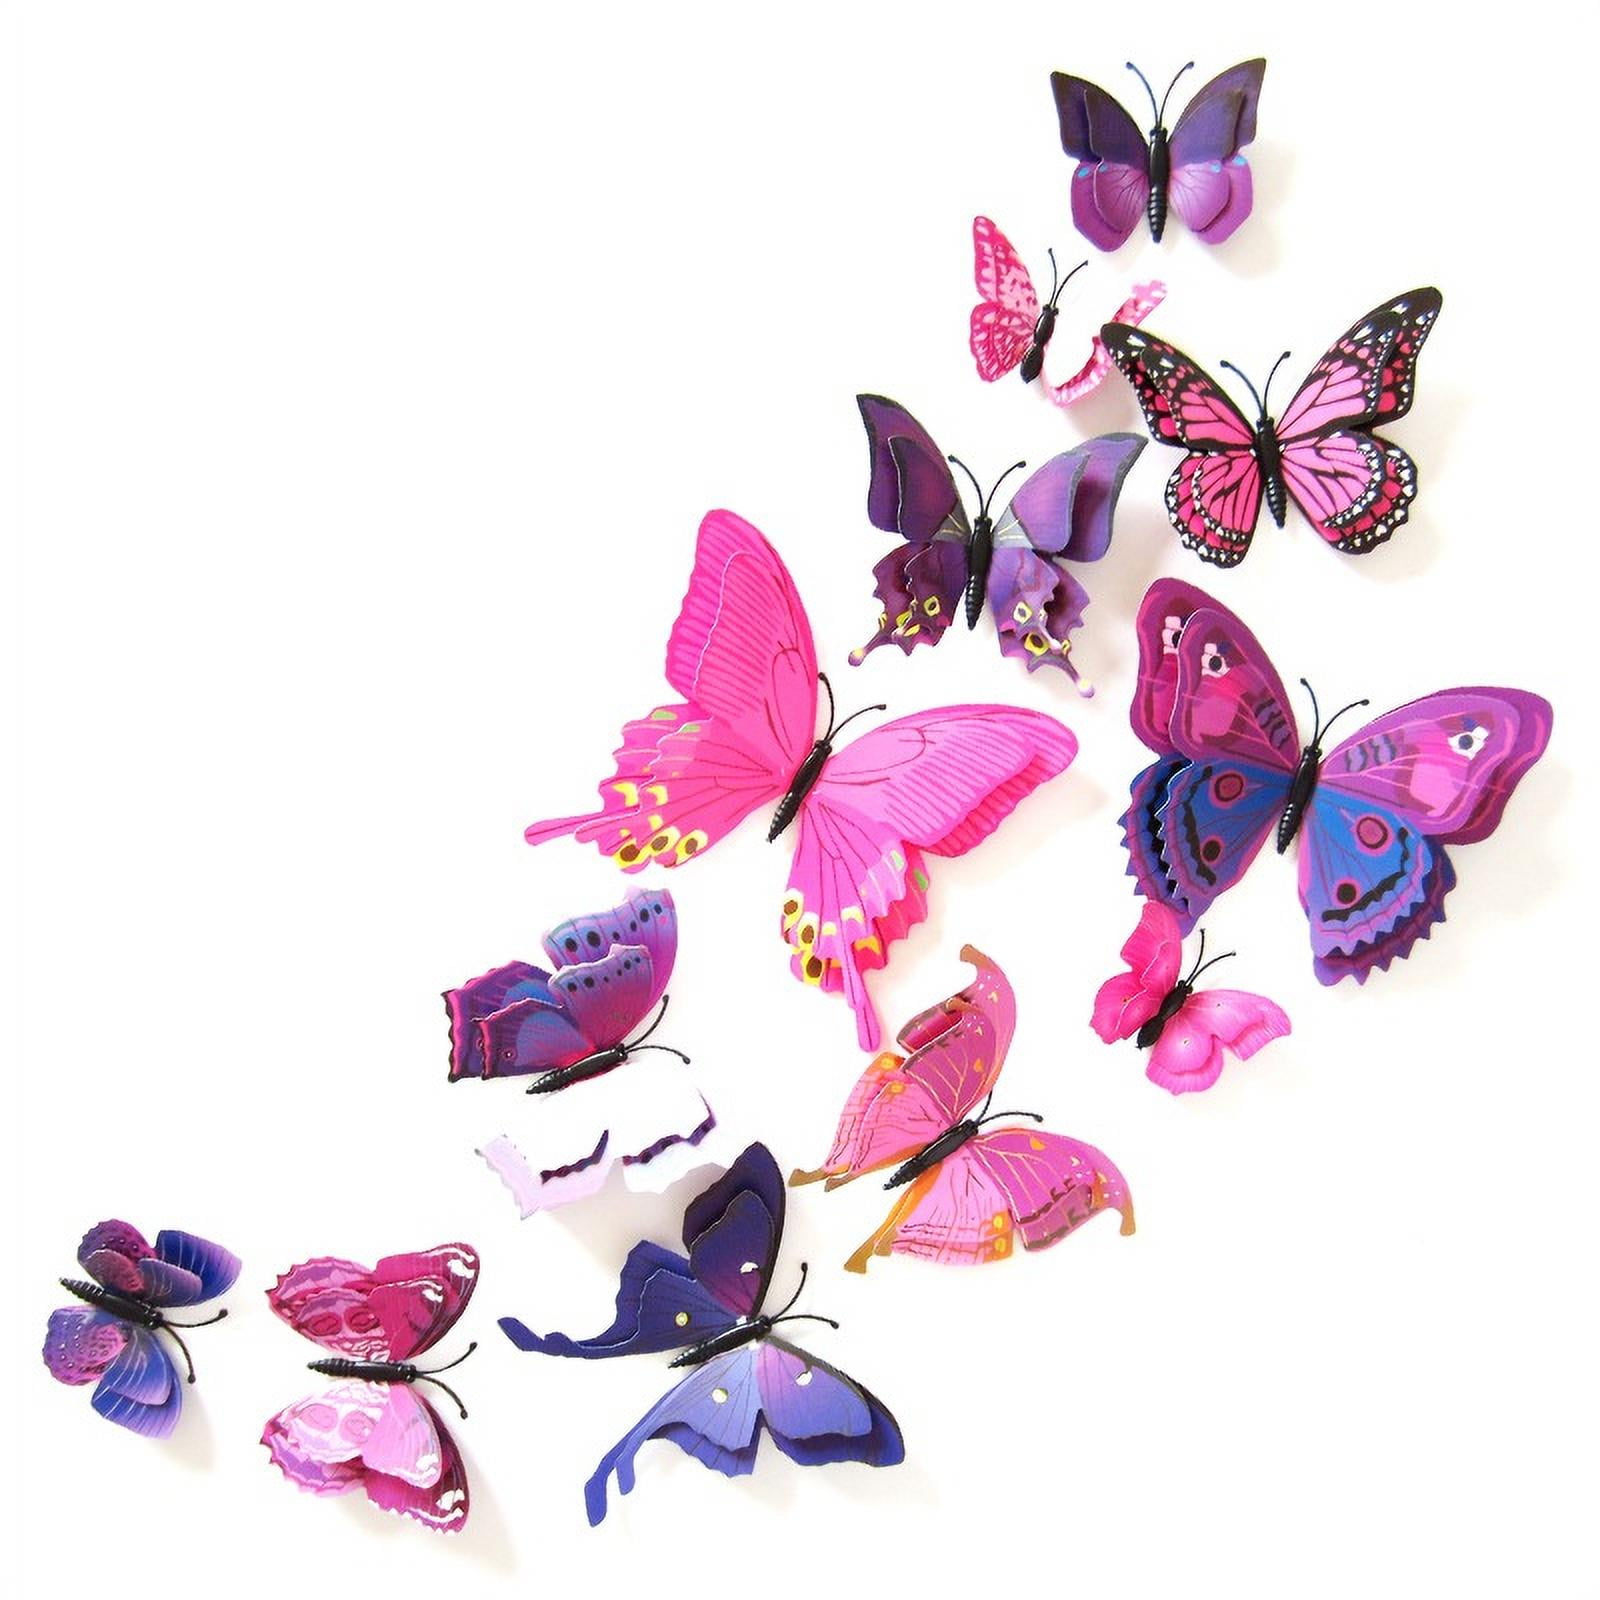 3D DIY Butterfly Wall Stickers Art Decals Home Any Room Decor HOT 5 Stars 12PCS 